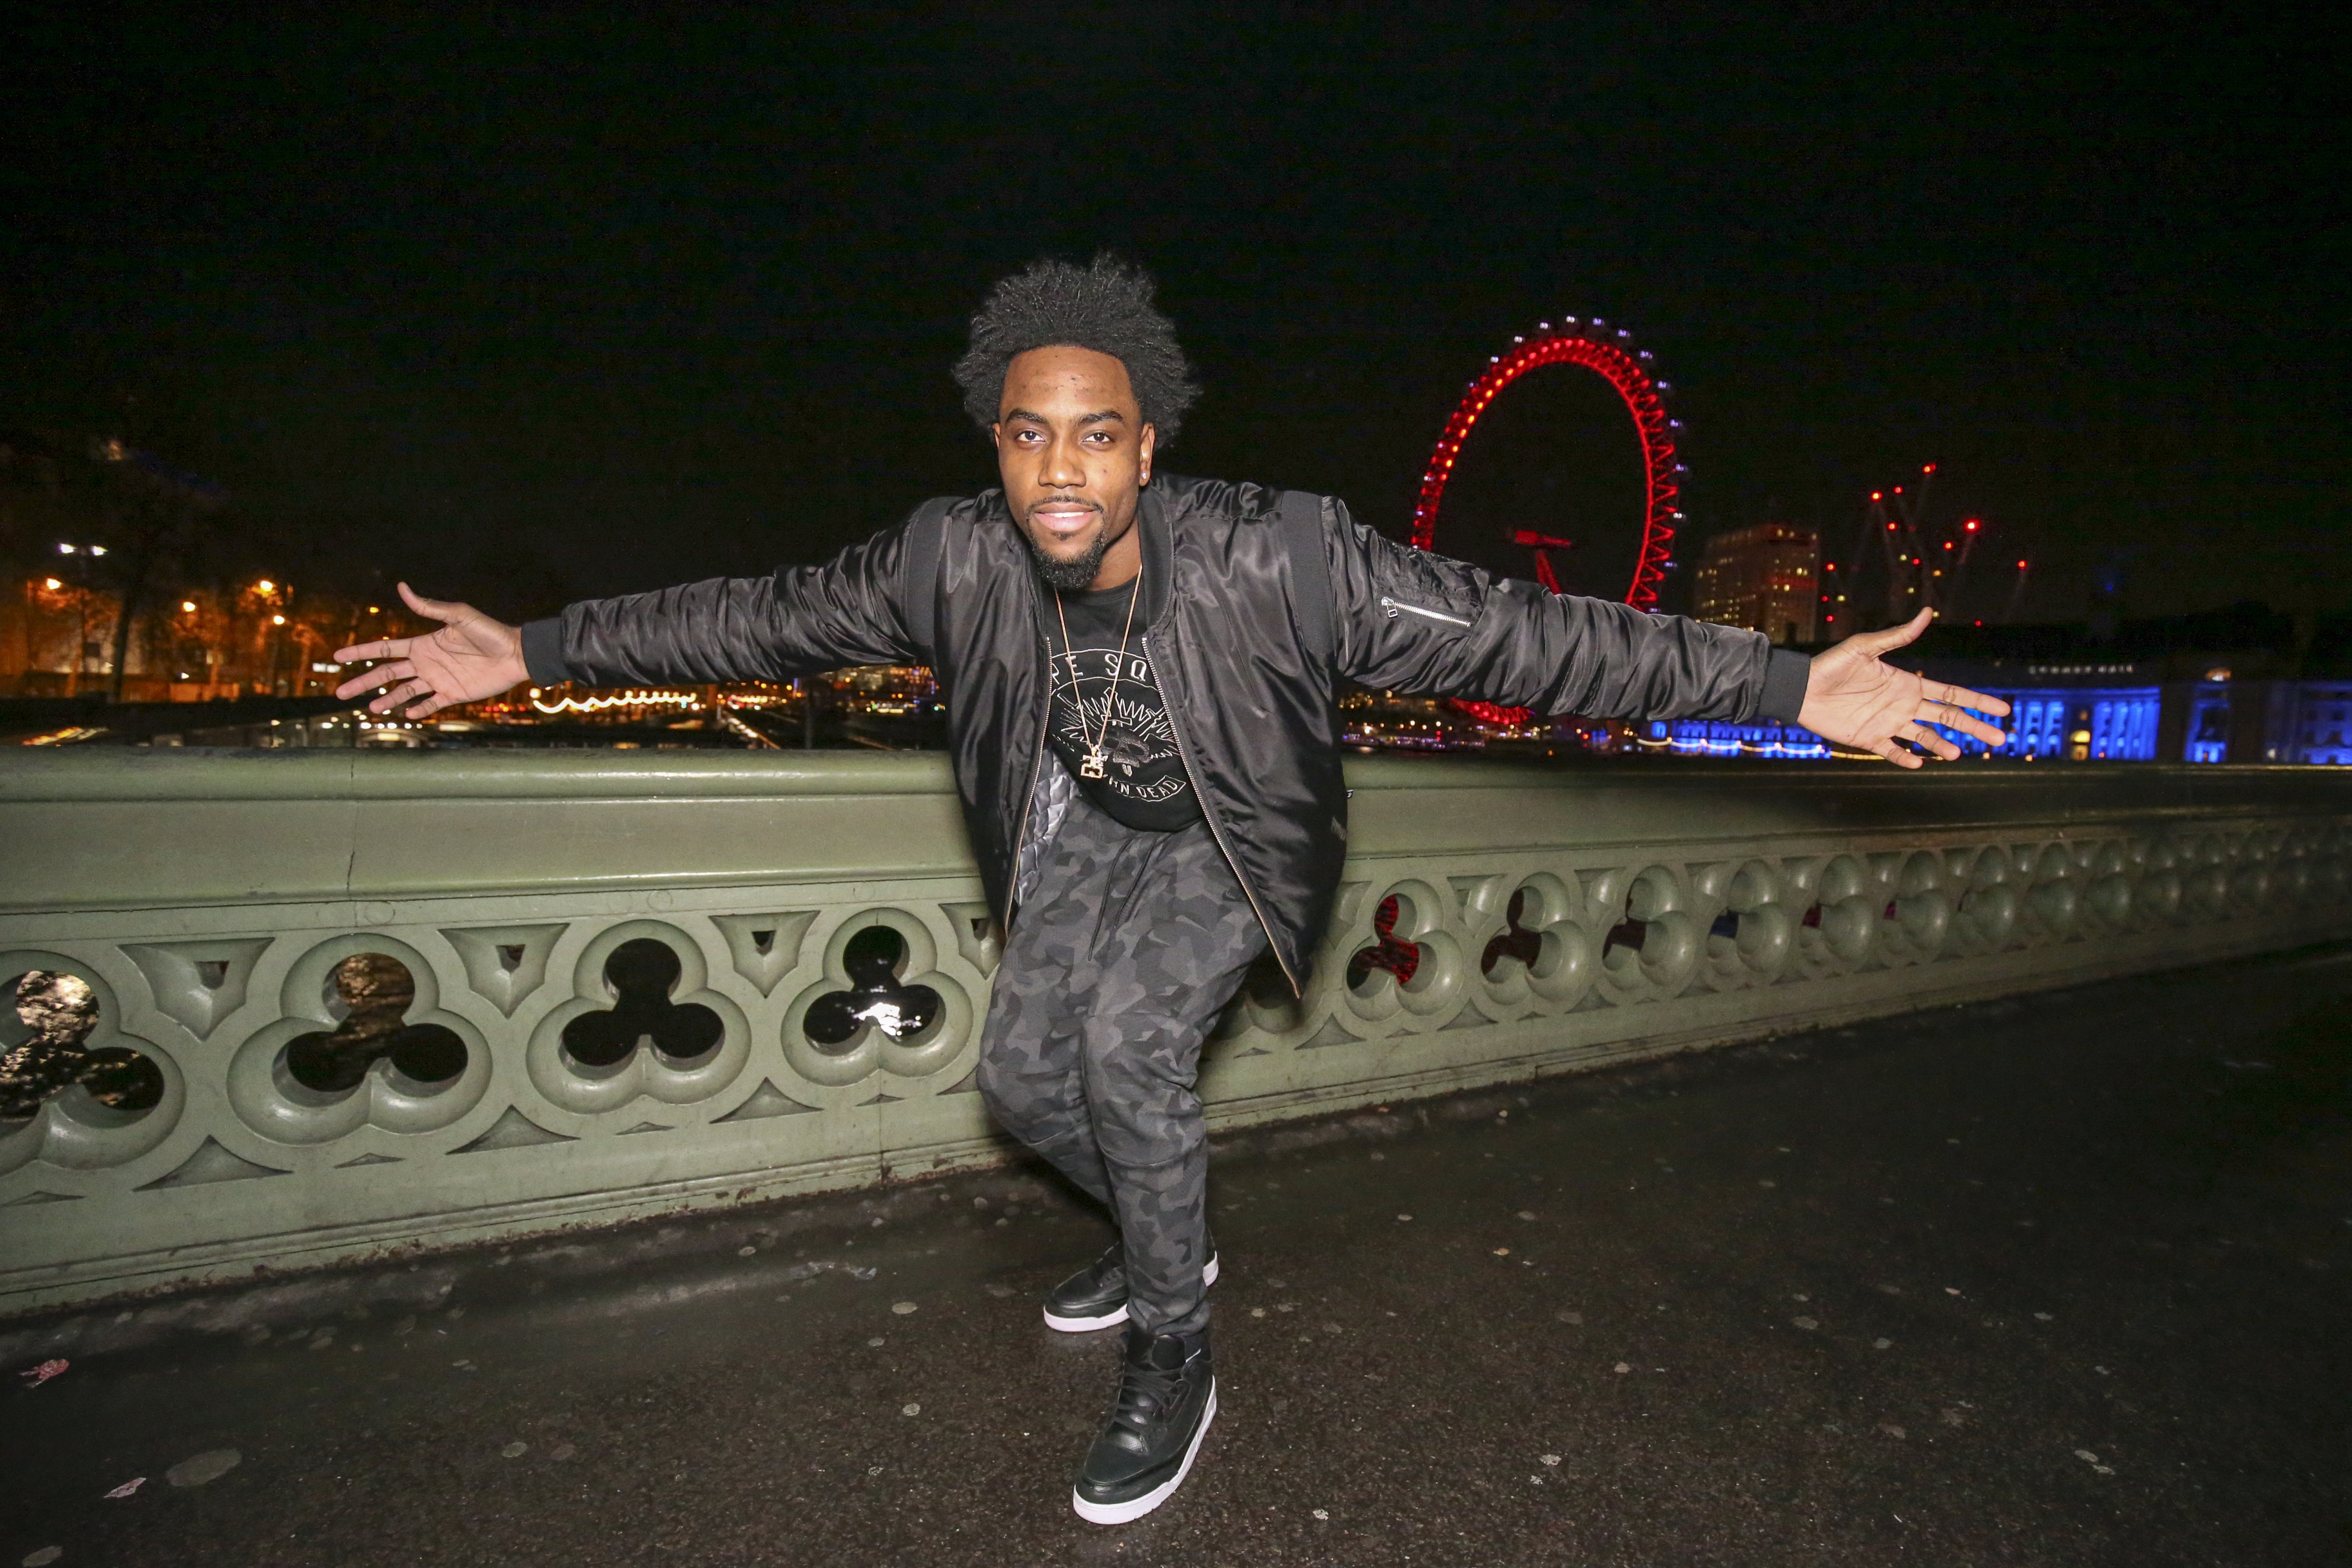 Rakeem Christmas of the Indiana Pacers poses for a photo as part of 2017 NBA London Global Games at the London Eye, on January 9, 2017, in London, England. | Source: Getty Images